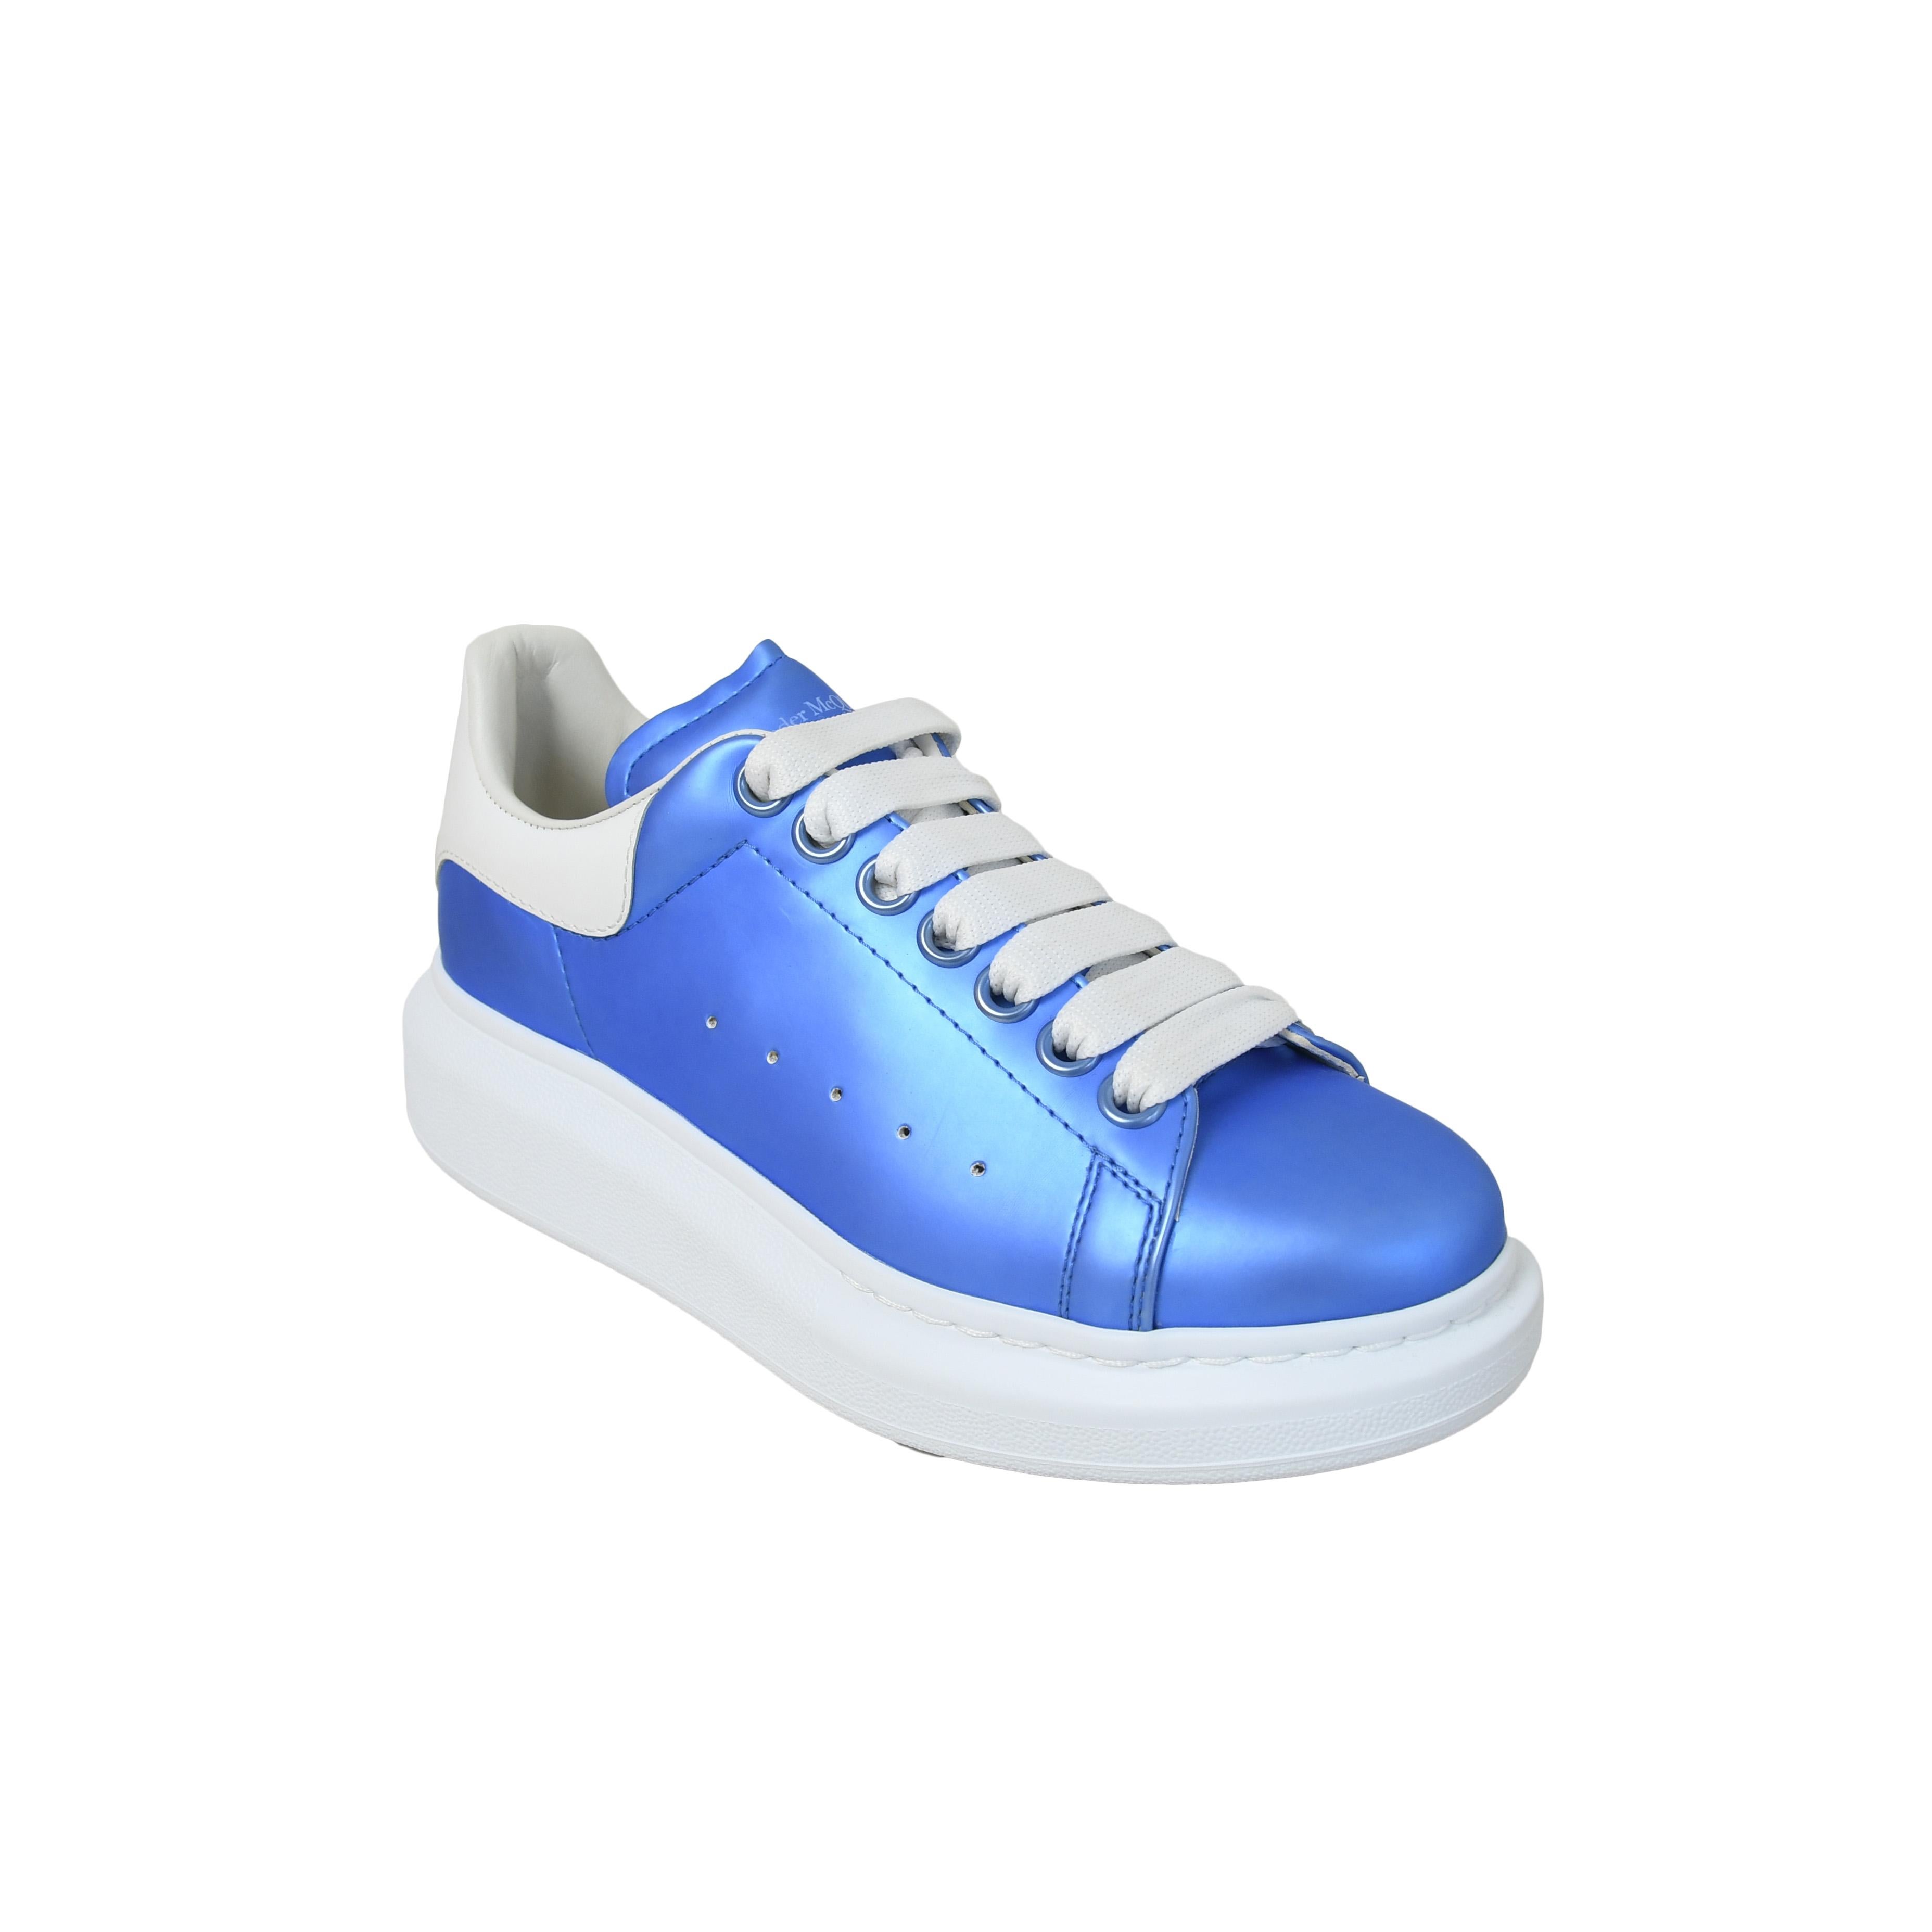 Alexander McQueen Steel Satin Sneakers Cornflower Blue

Condition:
Brand New, Never Worn.
This item comes with all the accessories.

Size: 36.5  & 38
